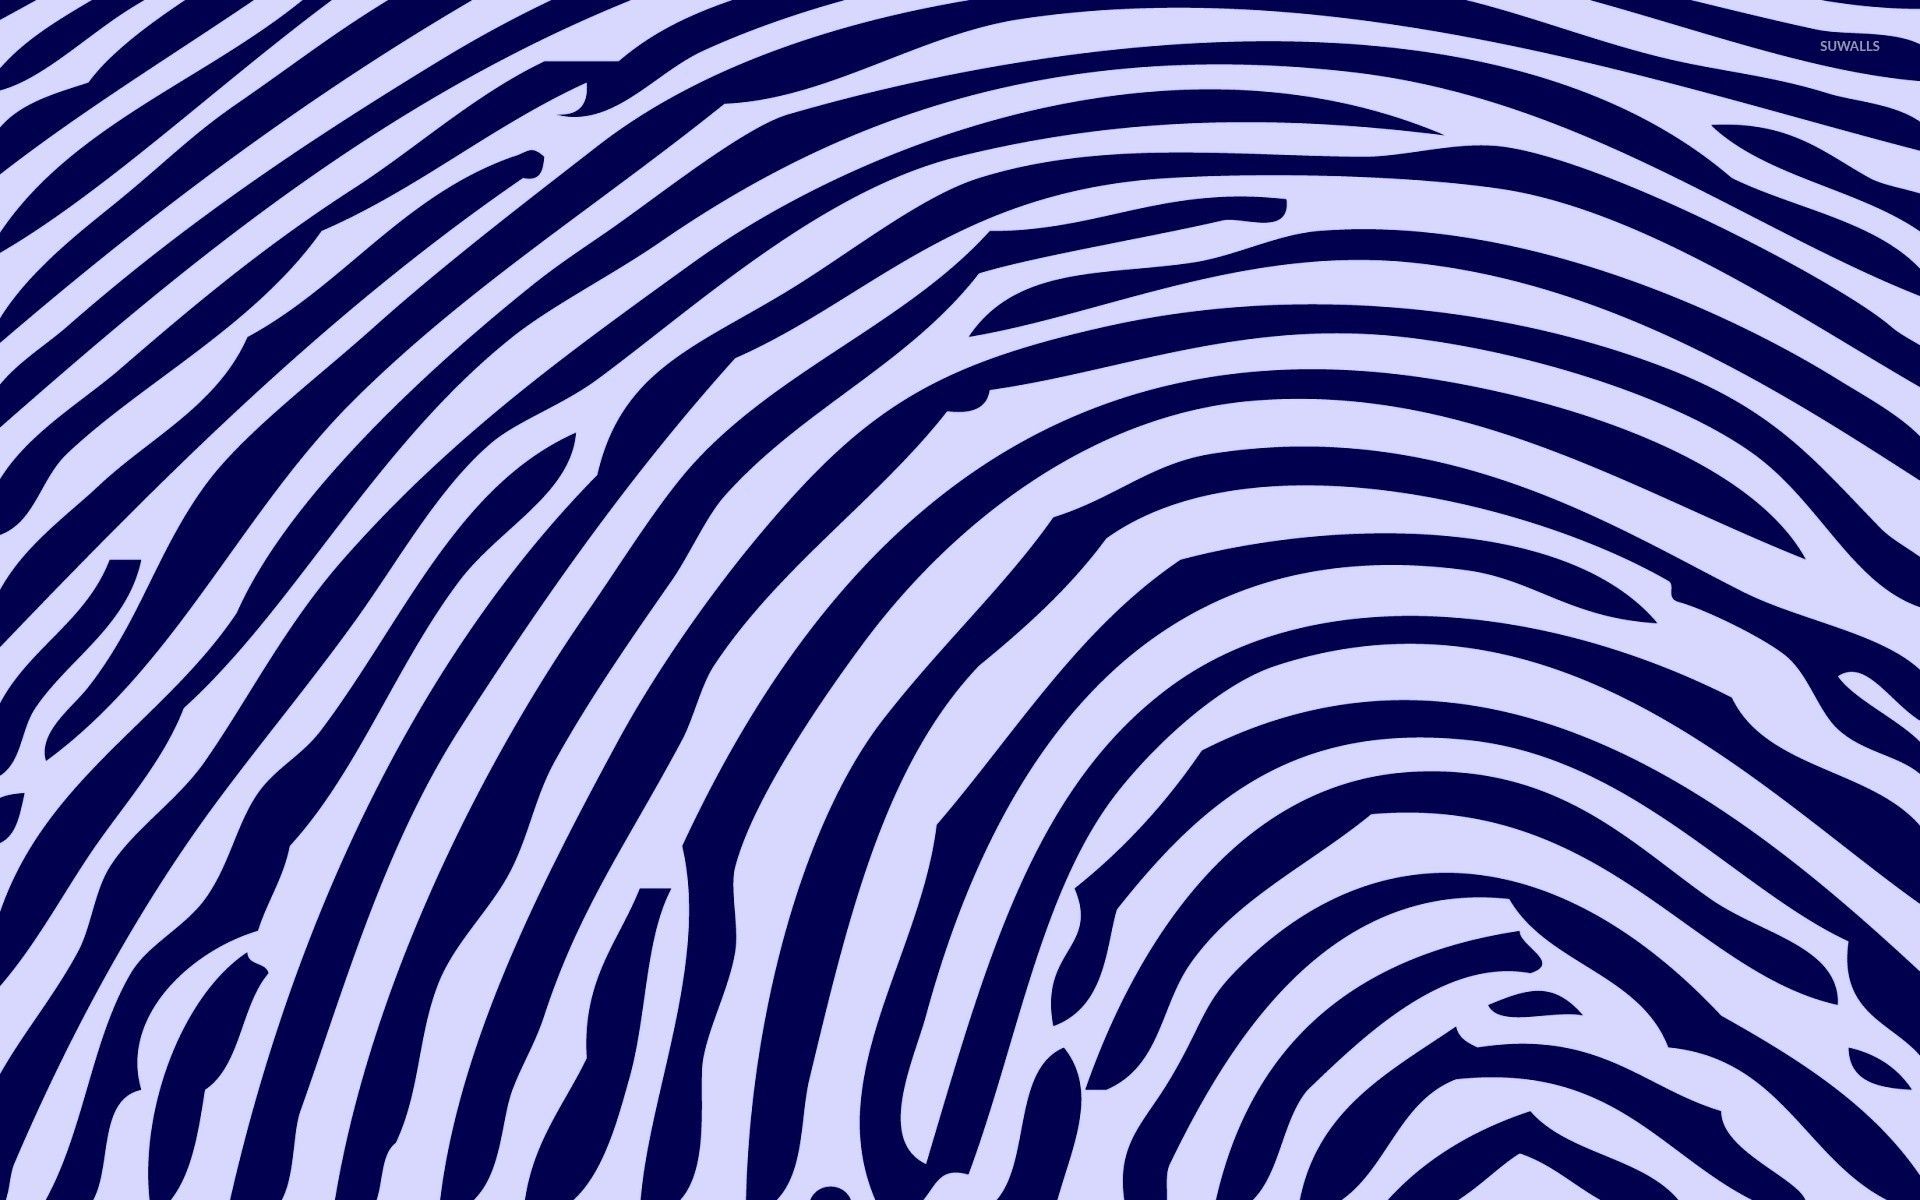 Abstract Finger Print Wallpapers